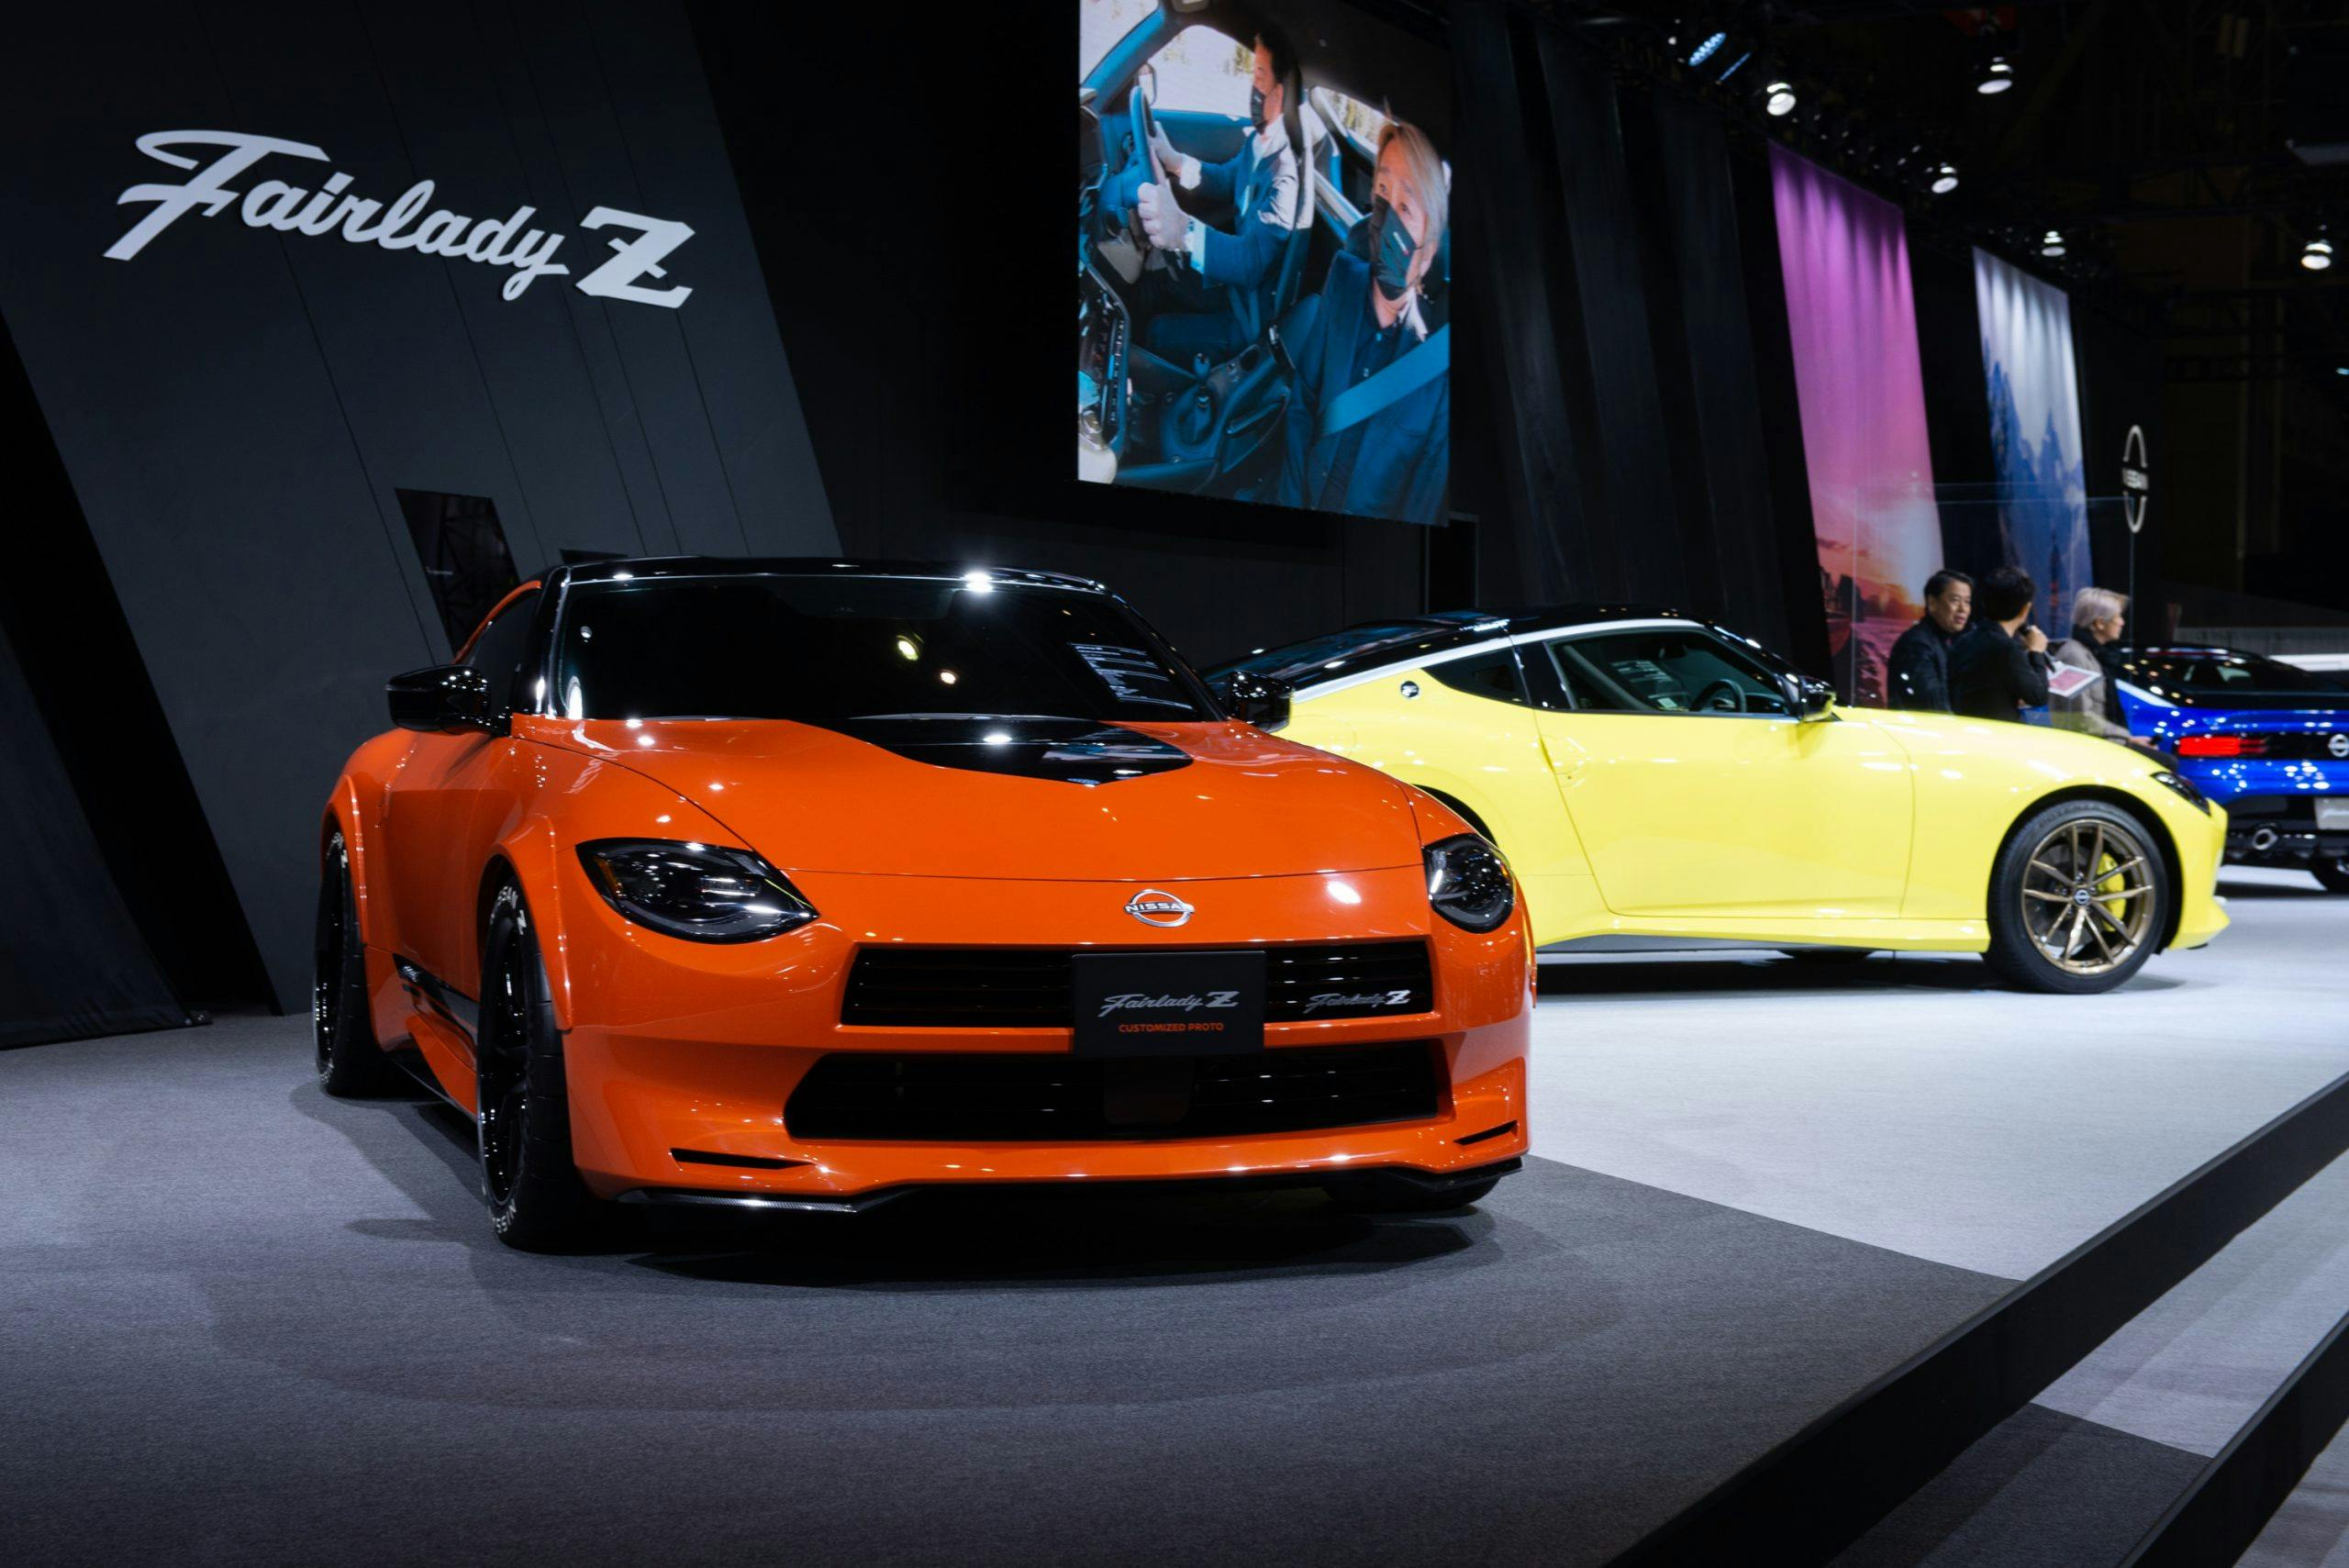 Nissan Fairlady Z Customized Proto Concept on stage with Proto Z